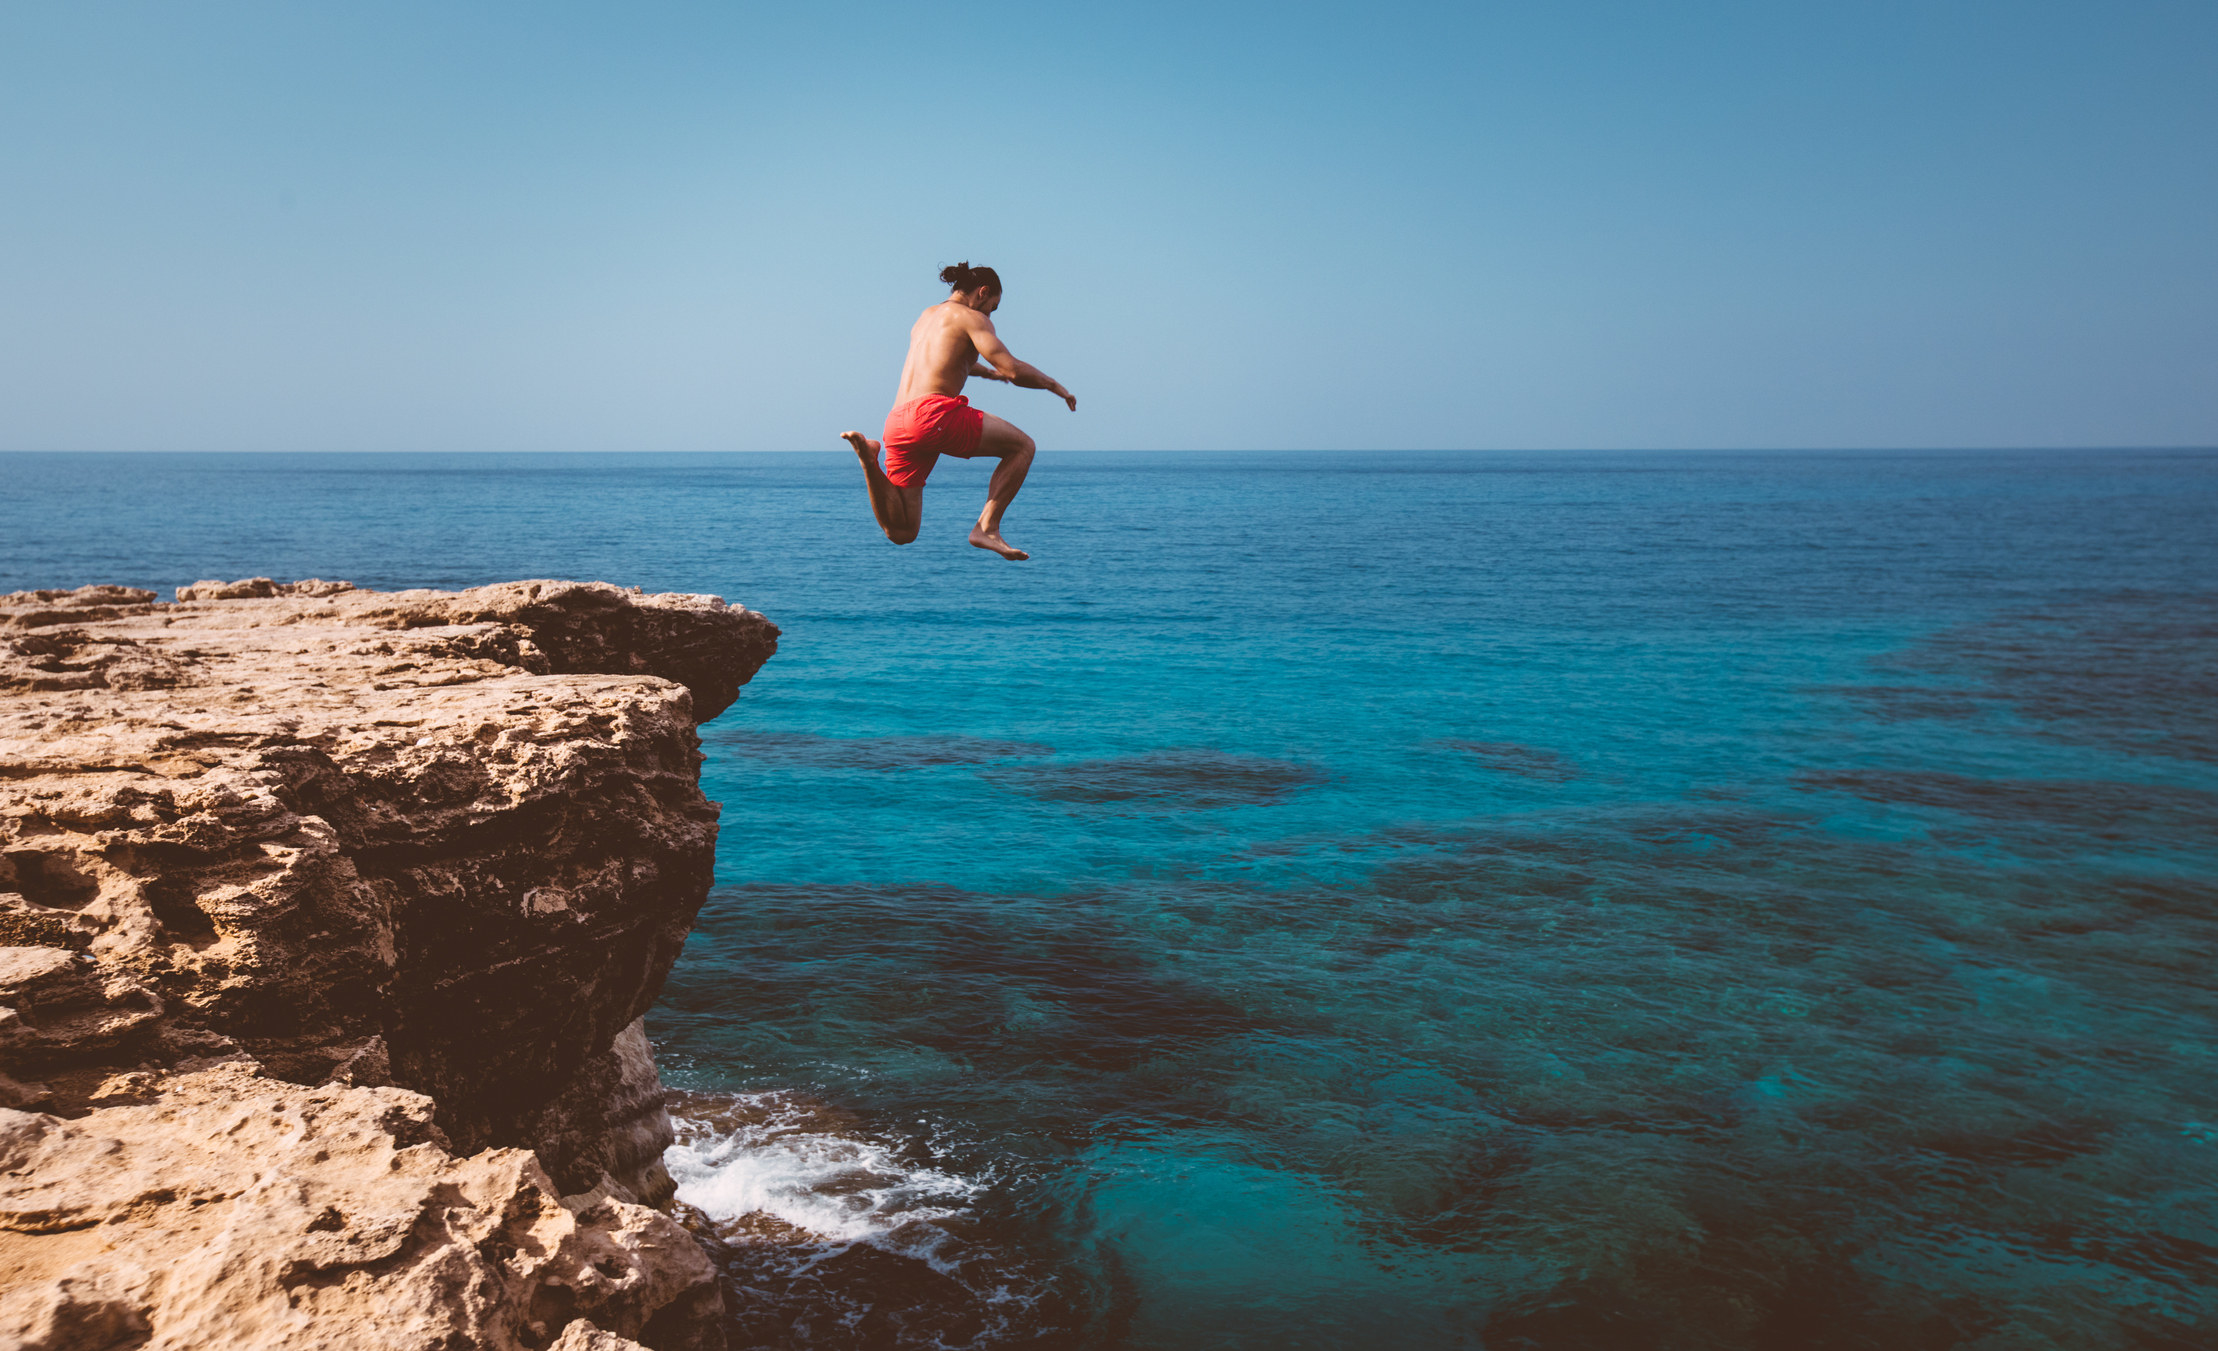 A man jumping off a cliff into the ocean